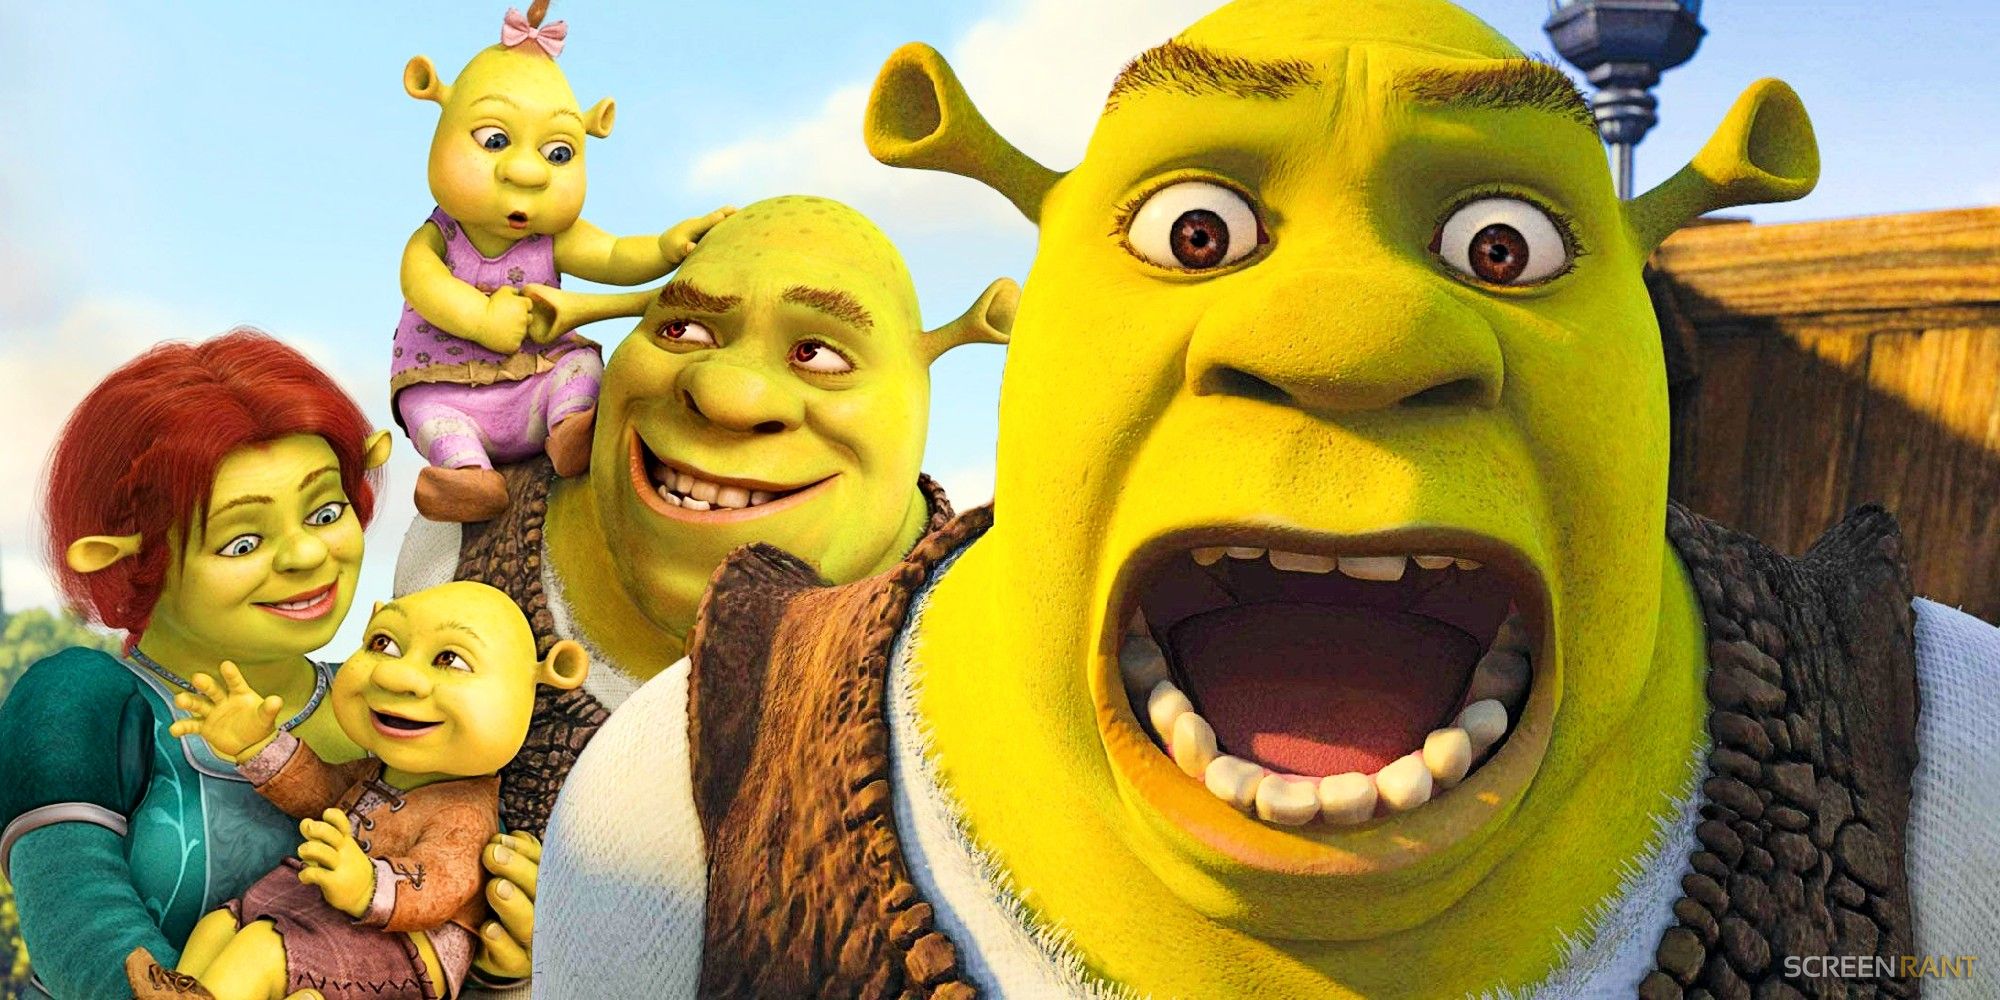 Shrek 5 Reclaiming A Box Office Record Shrek Lost 7 Years Ago Will Be Nearly Impossible